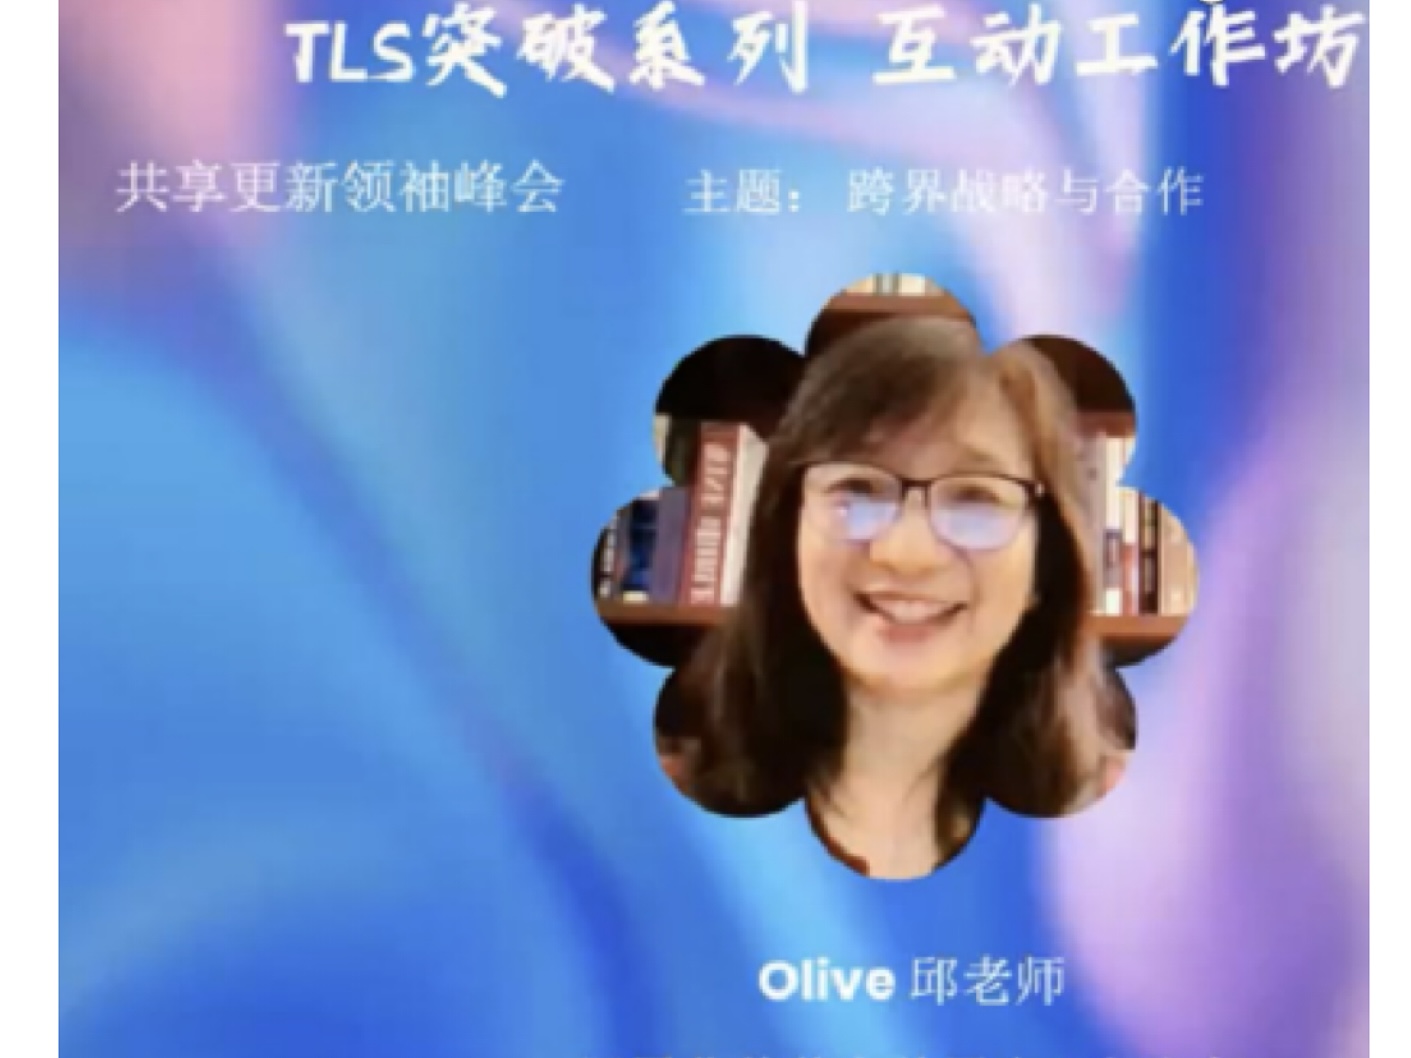 A screenshot of the live event where Ms. Olive shared her view on the older, unmarried Christians during the Global Transformutual Leadership Summit on August 16, 2023.